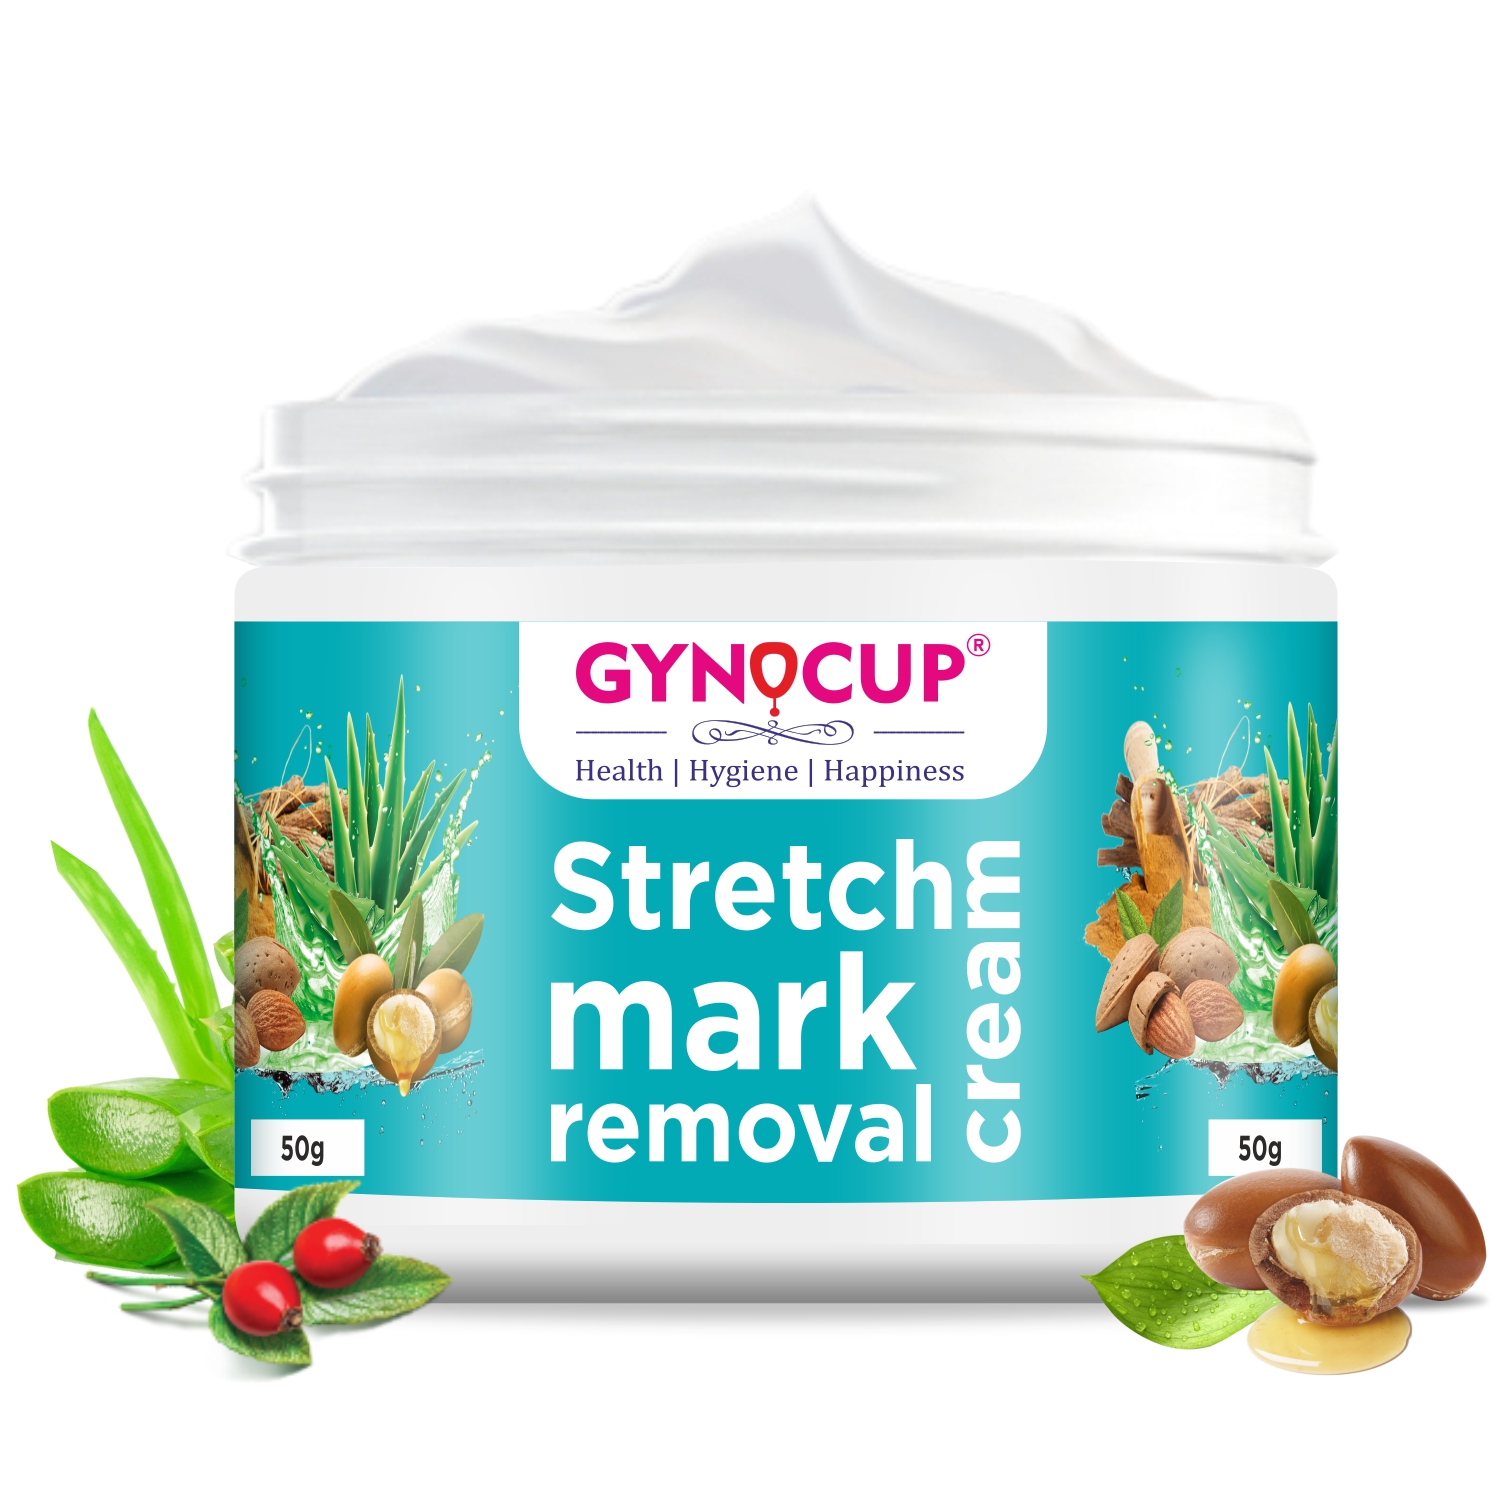 Gynocup Stretch Marks Removal Cream For Pregnancy With The Goodness Of Shea Butter & Vitamin E